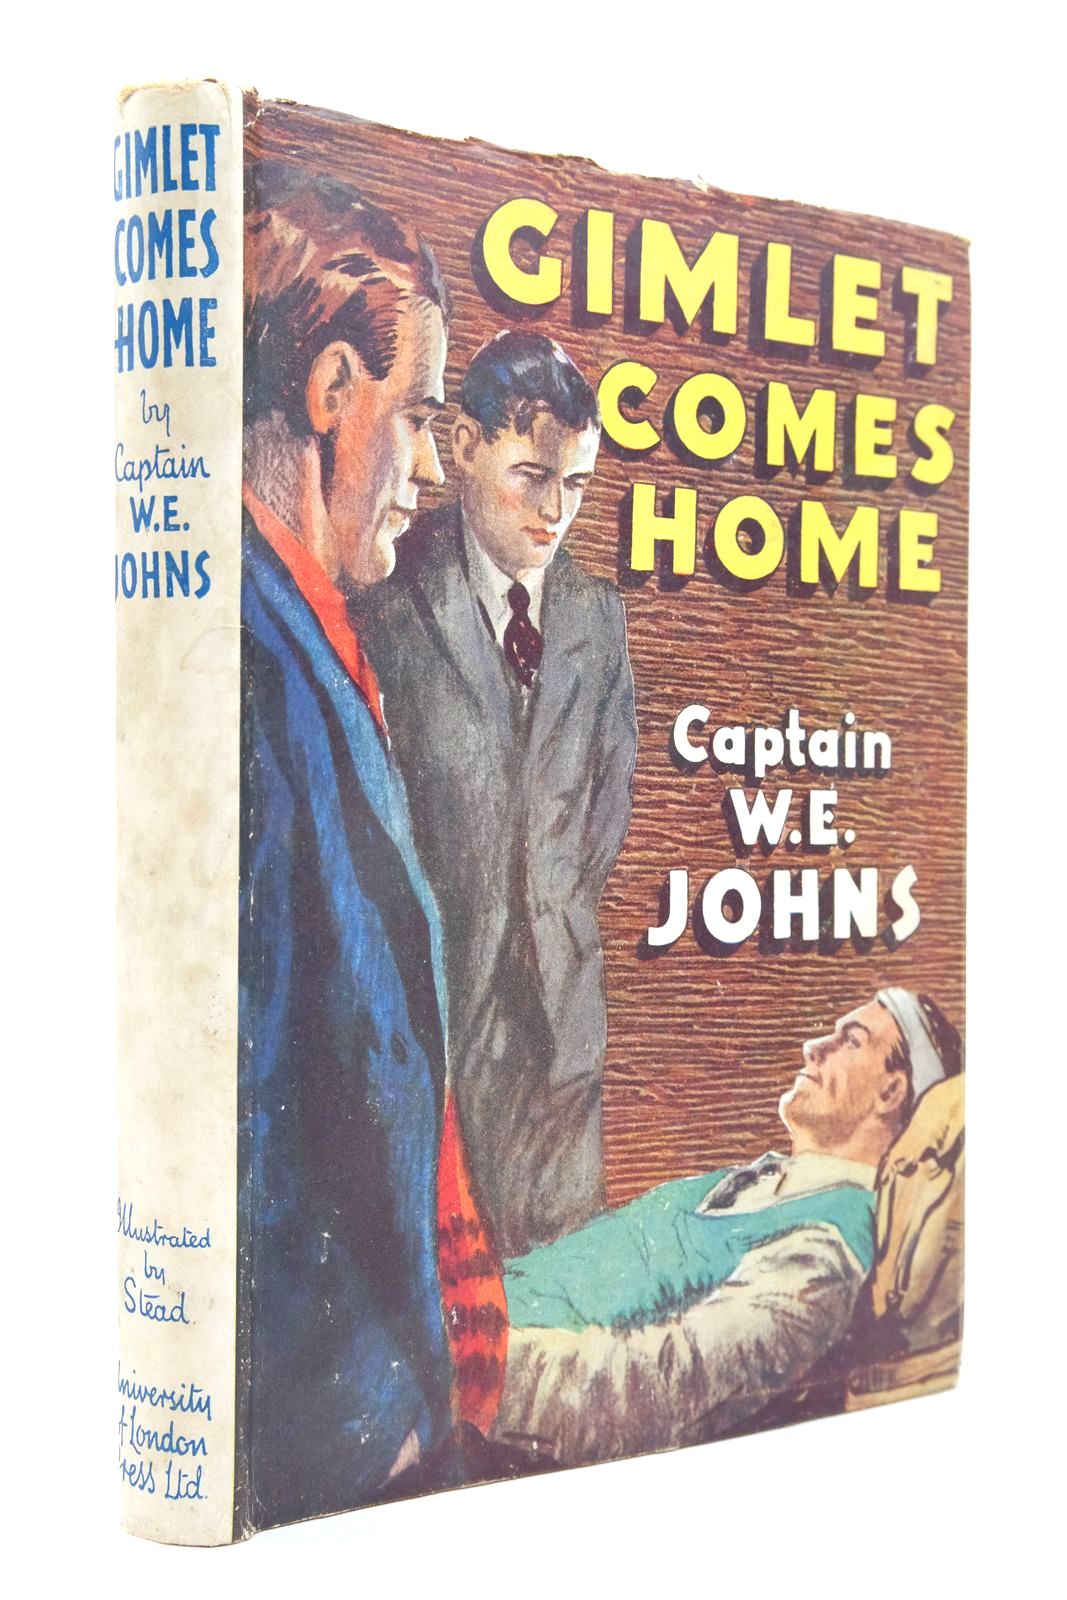 Photo of GIMLET COMES HOME written by Johns, W.E. published by University of London Press Ltd. (STOCK CODE: 2139720)  for sale by Stella & Rose's Books